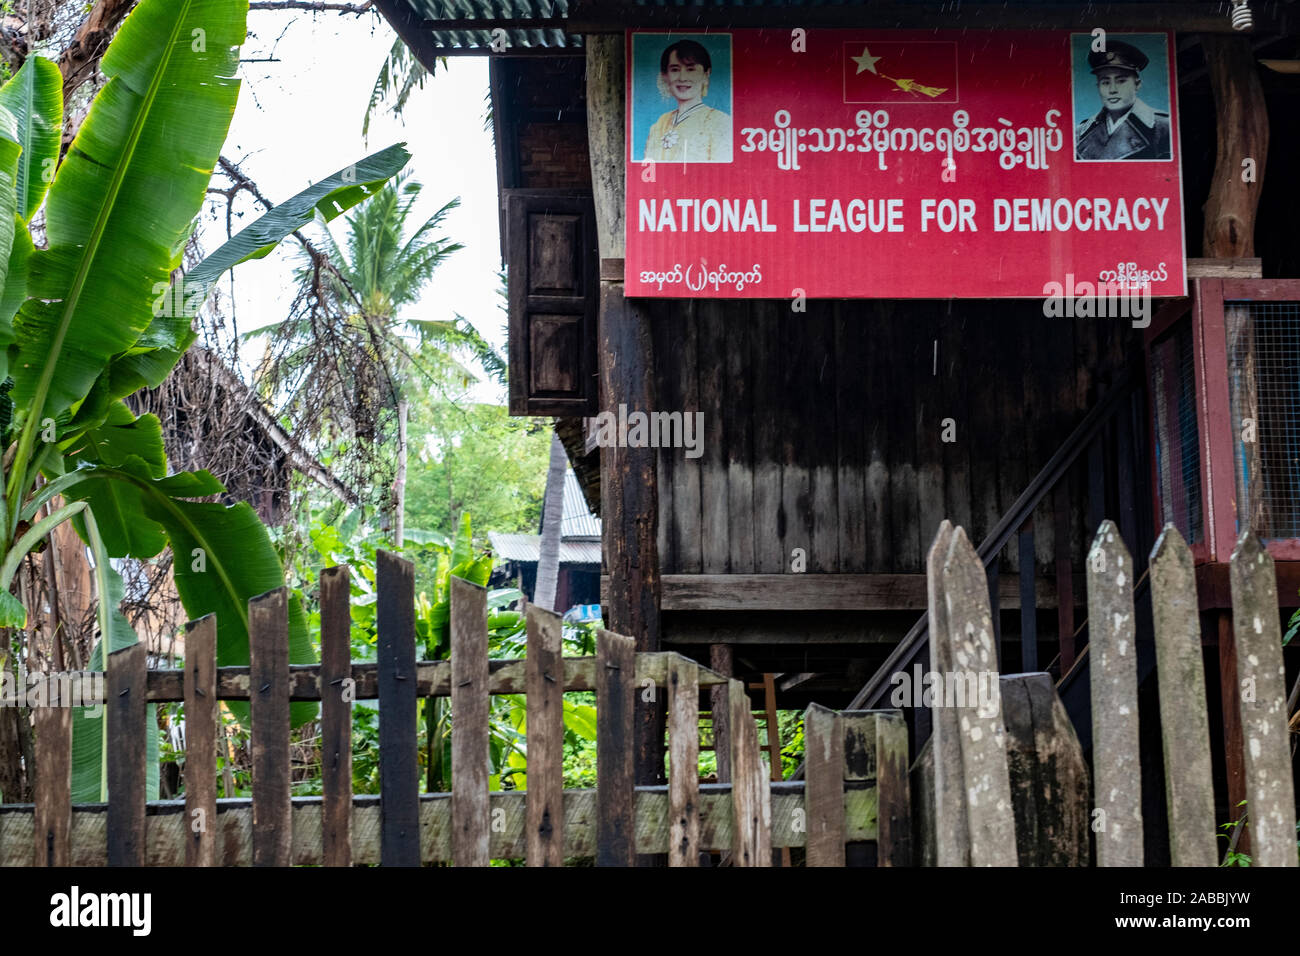 Village office for the Burmese National League for Democracy with a poster depicting Aung San Suu Kyi, Nobel laureate, and her father in rural Myanmar Stock Photo